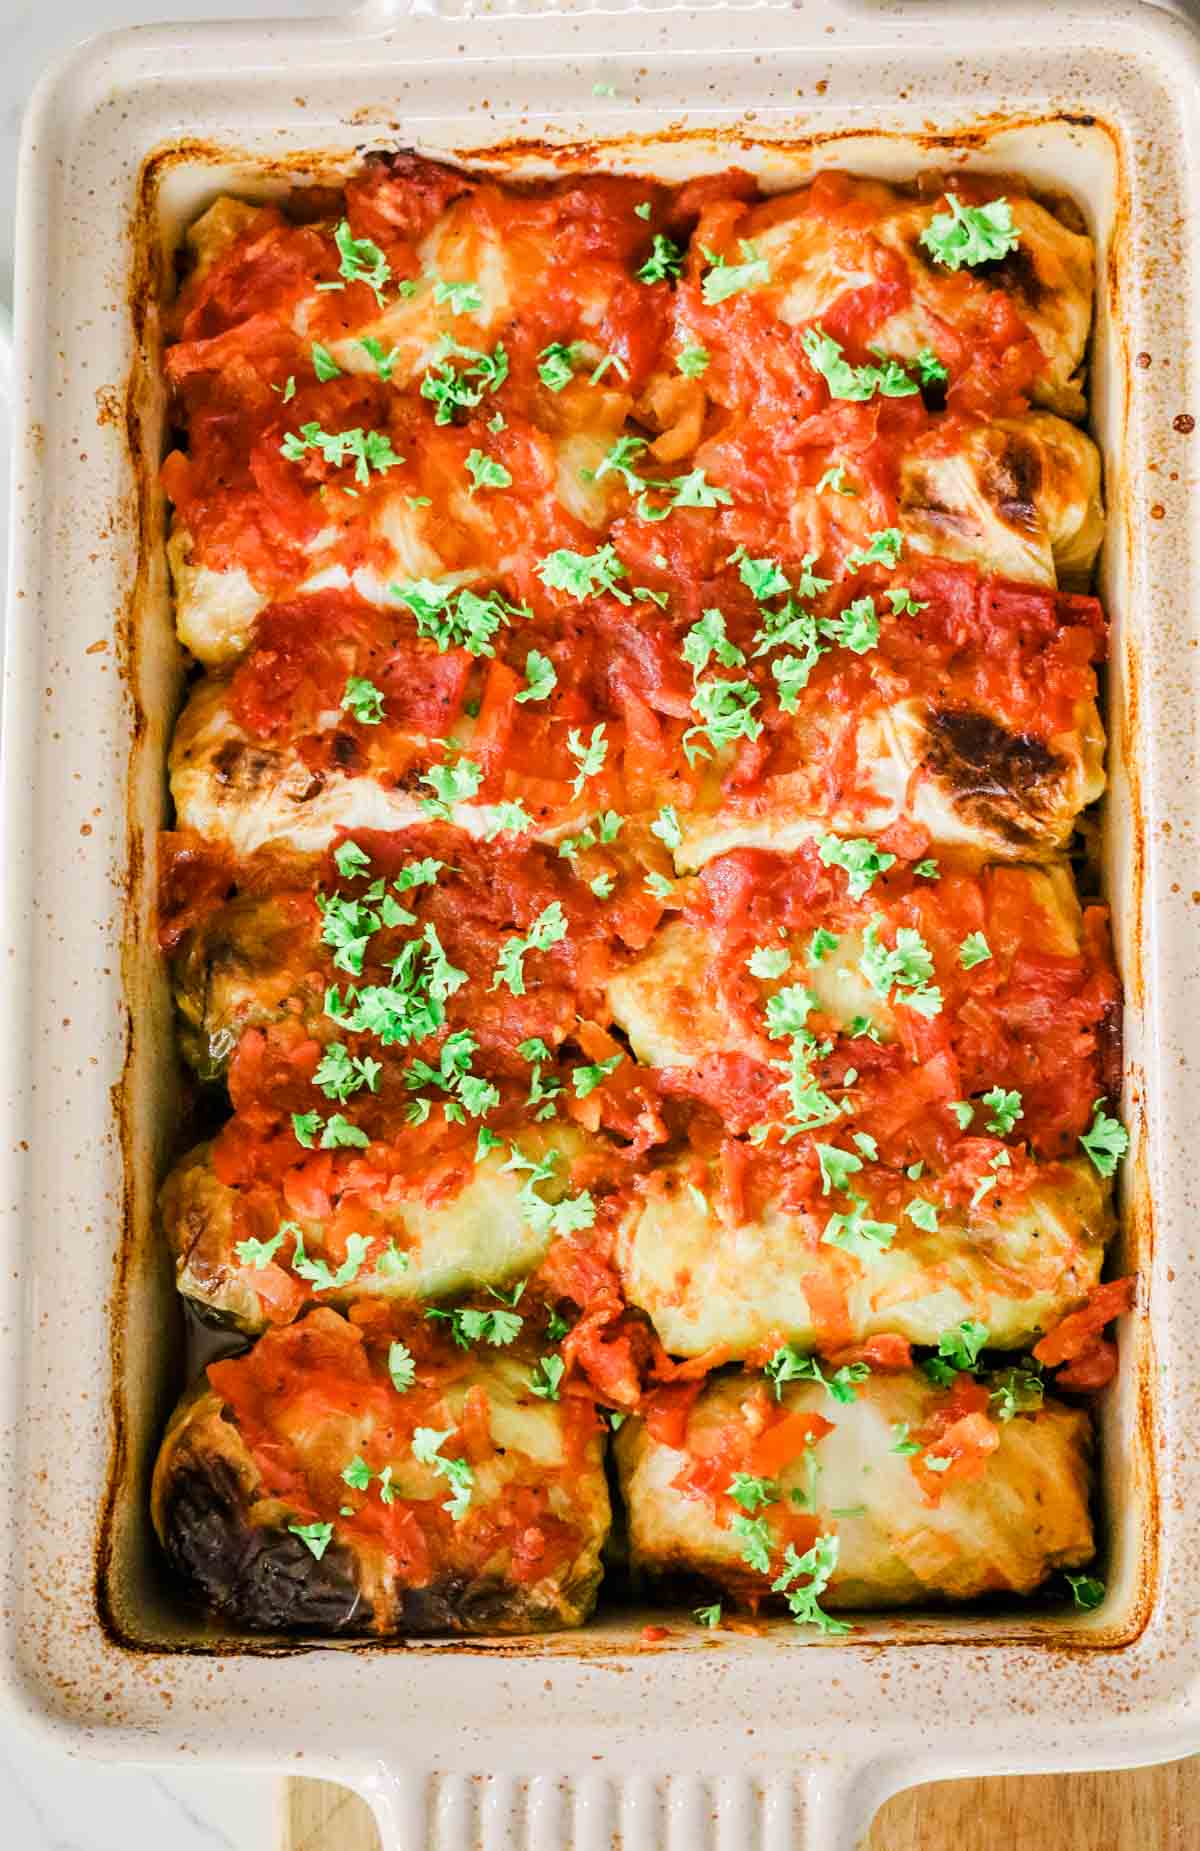 cabbage rolls lined up in a casserole dish